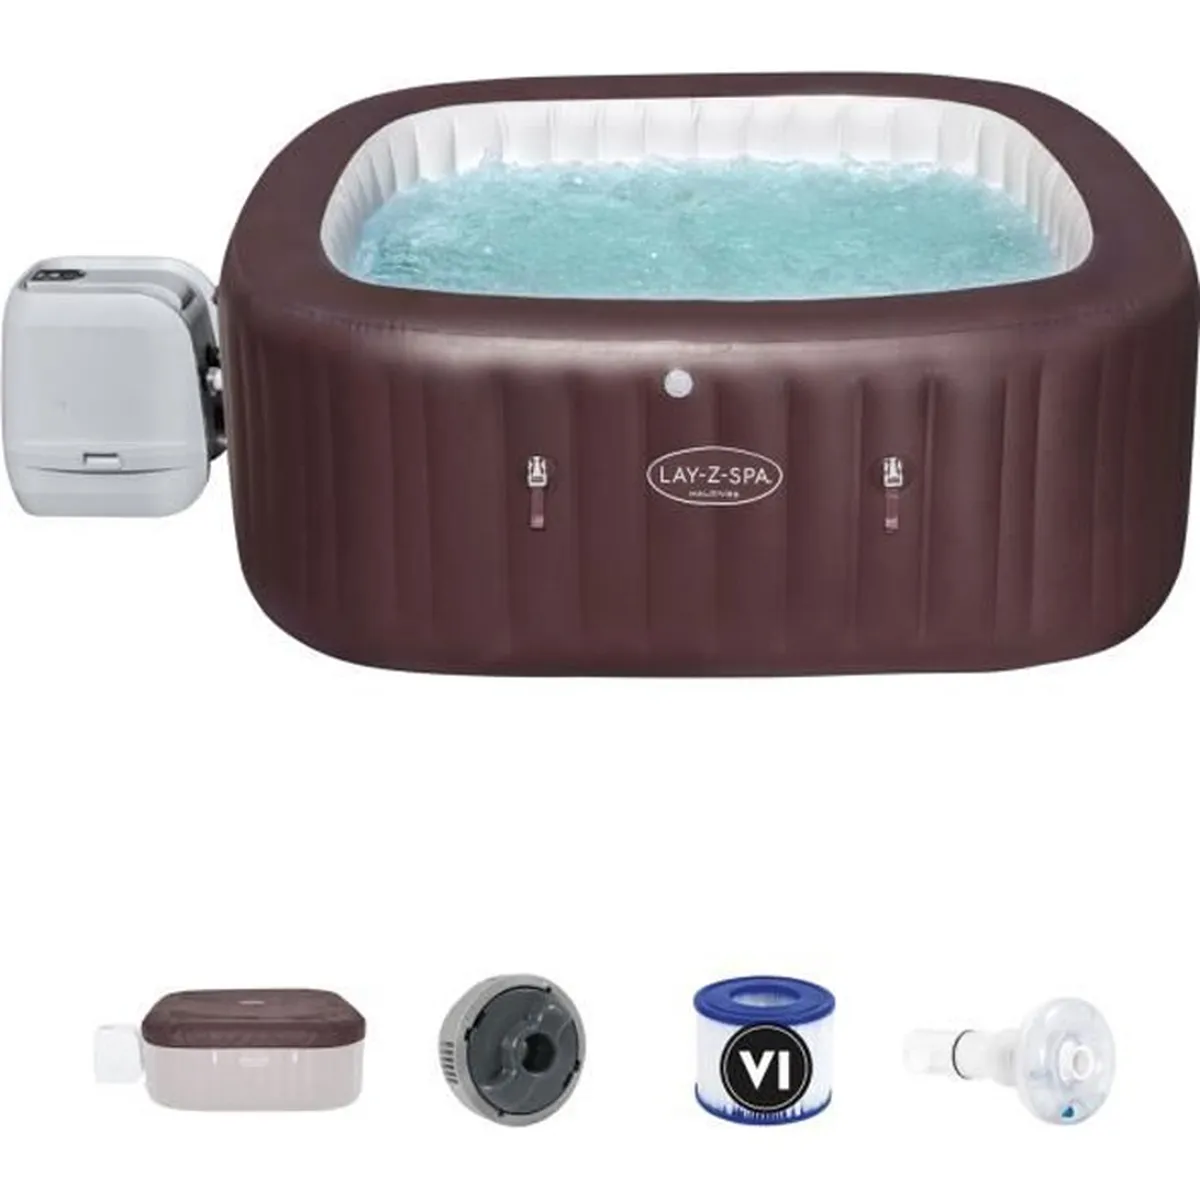 BESTWAY Spa gonflable Lay-Z-Spa Maldives Hydrojet Pro pas cher - Spa gonflable Cdiscount